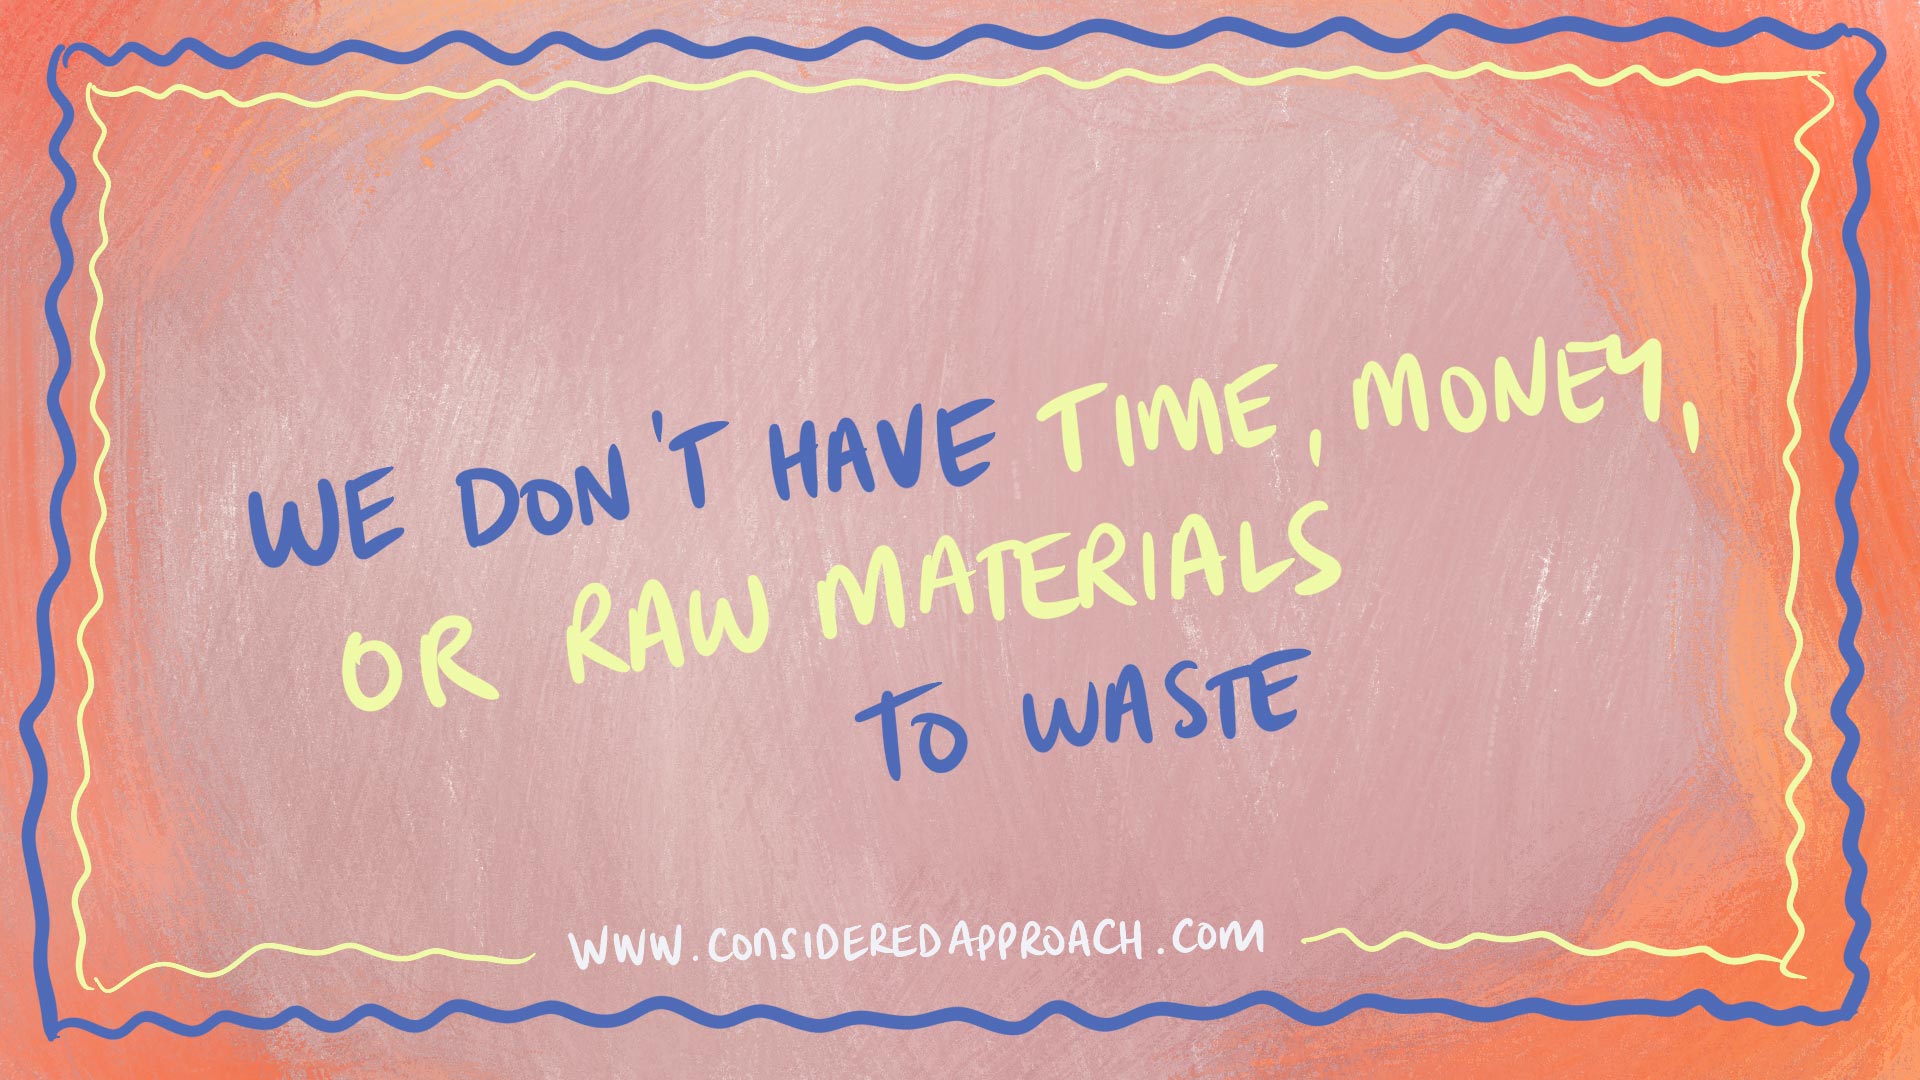 There's no time, raw materials, or energy to waste